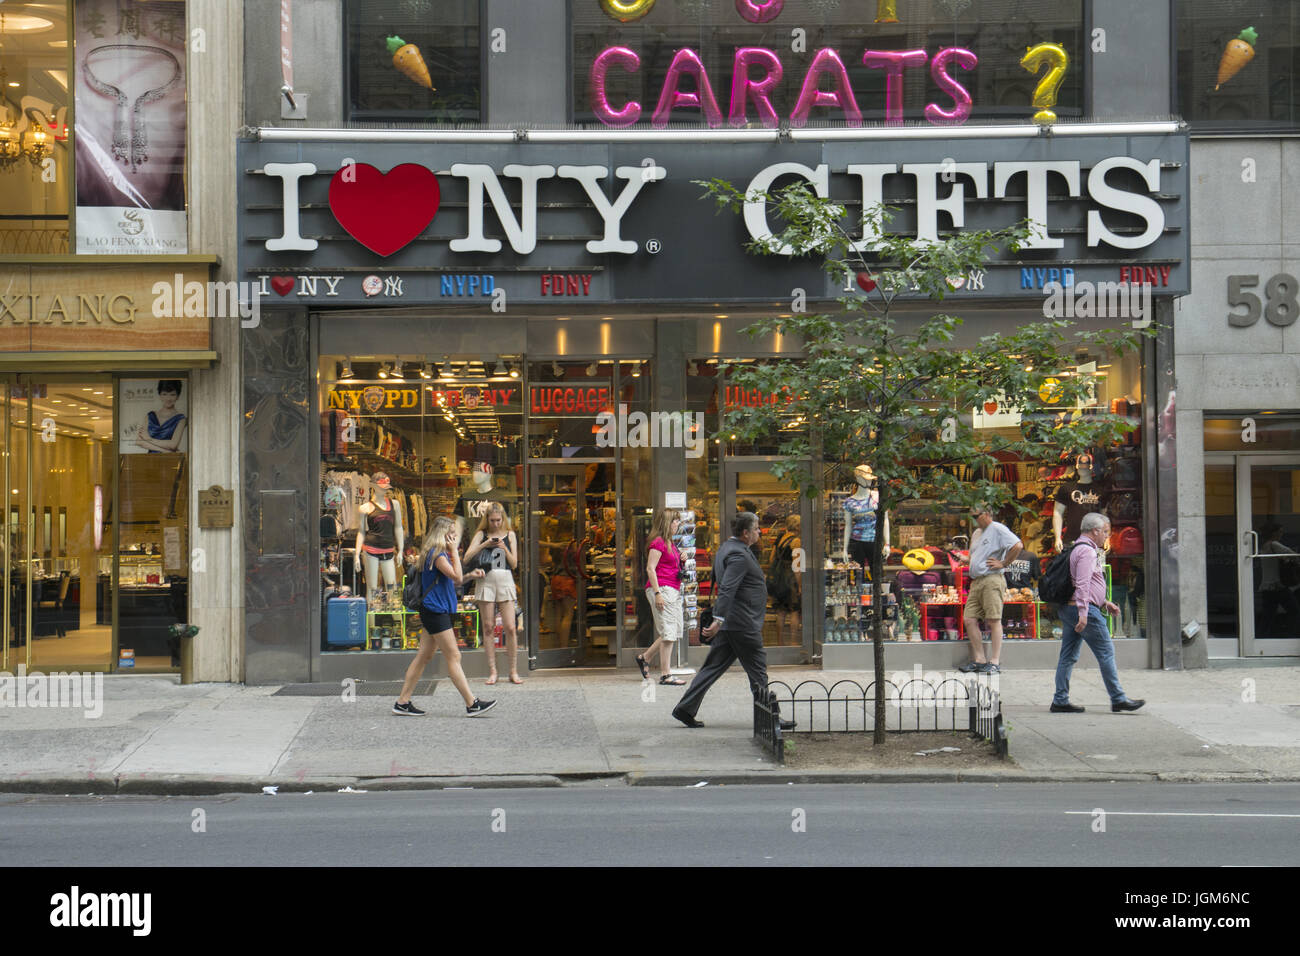 "I Love NY Gifts" souvenir store on 5th Ave. in midtown